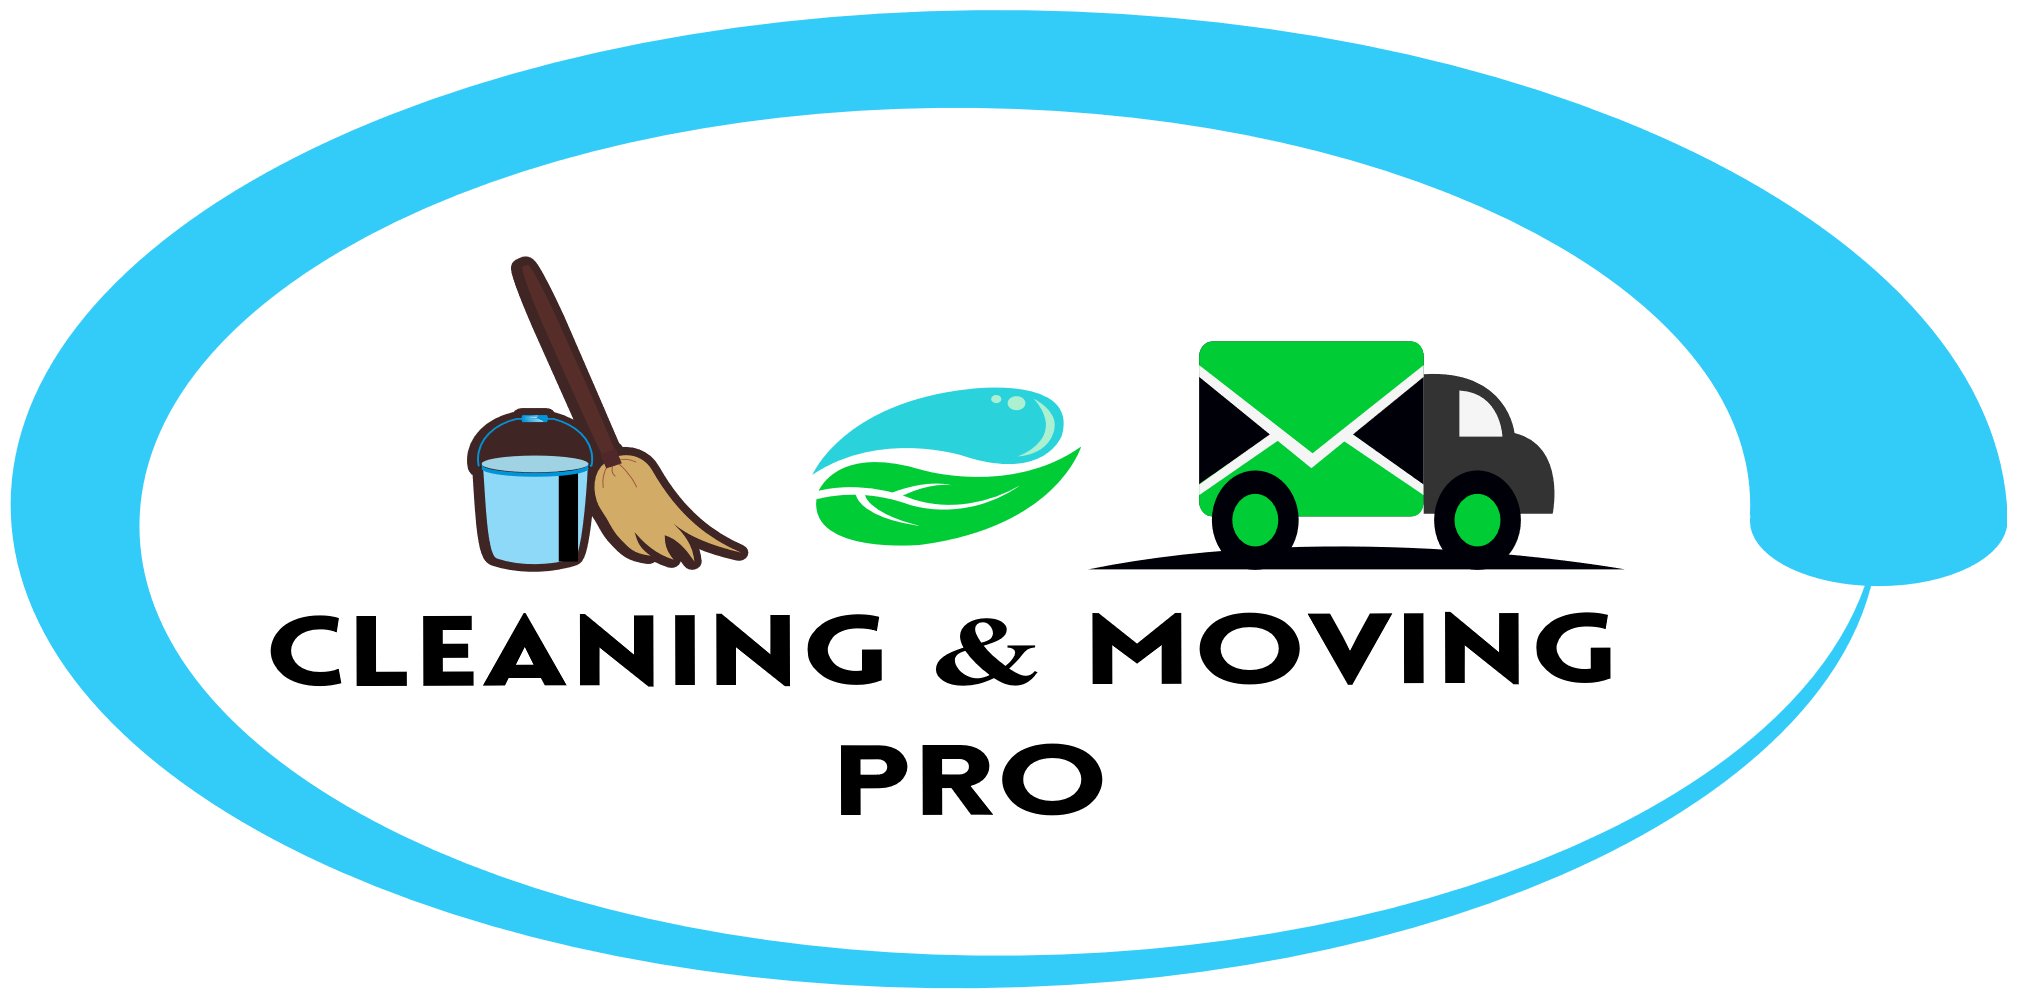 Office Cleaning Galway, Office Cleaning Dublin, Office Cleaning Athlone-Is Our Specialty. From toilet cleaning to window cleaning, we do it all.-CLEANING AND MOVING PRO